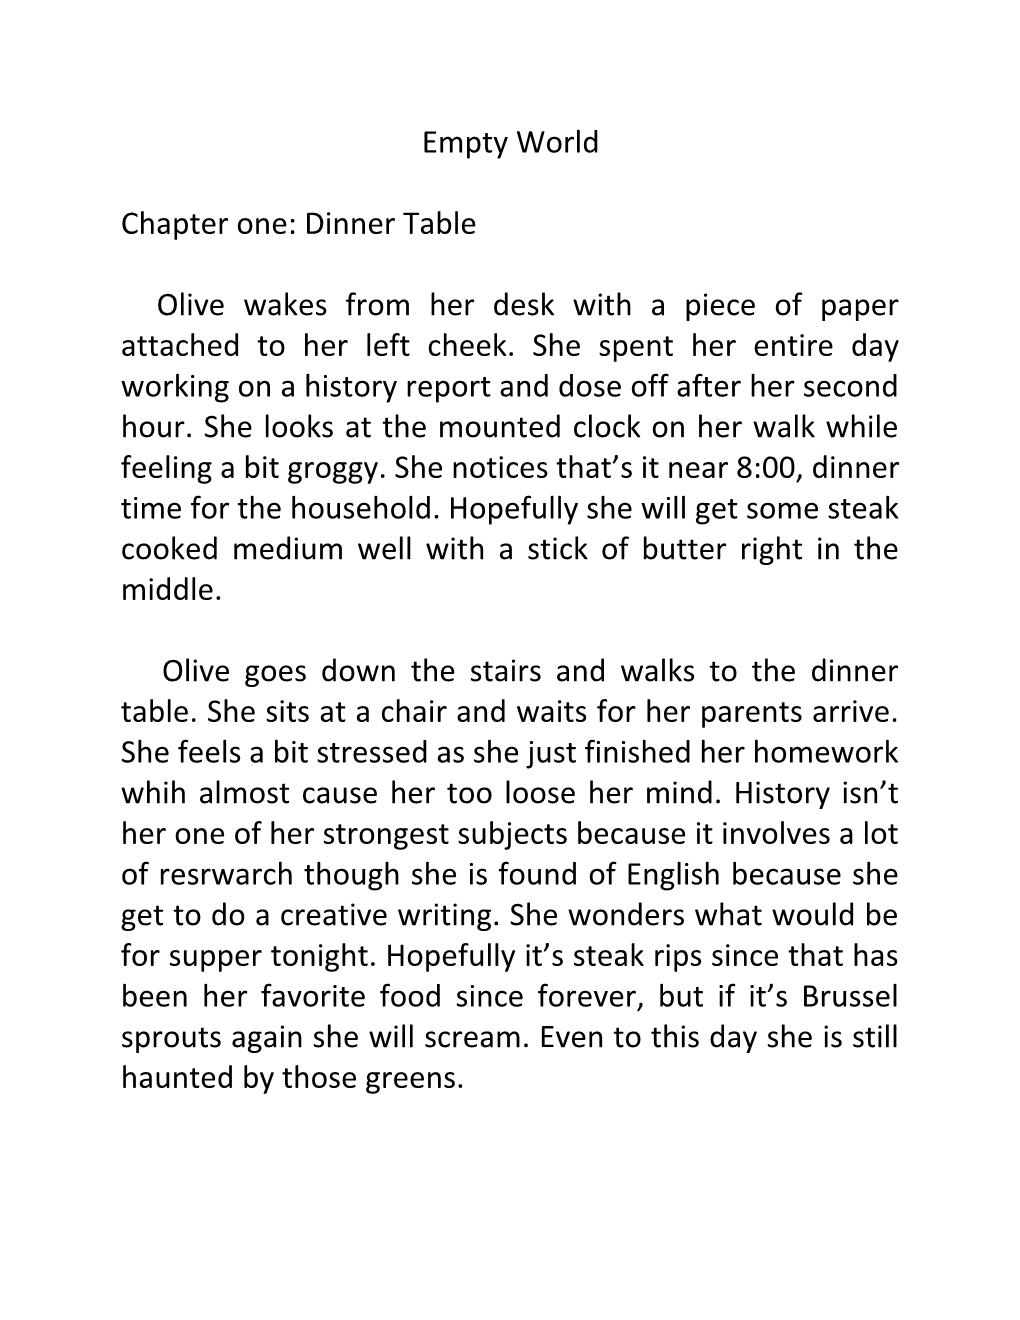 Chapter One: Dinner Table